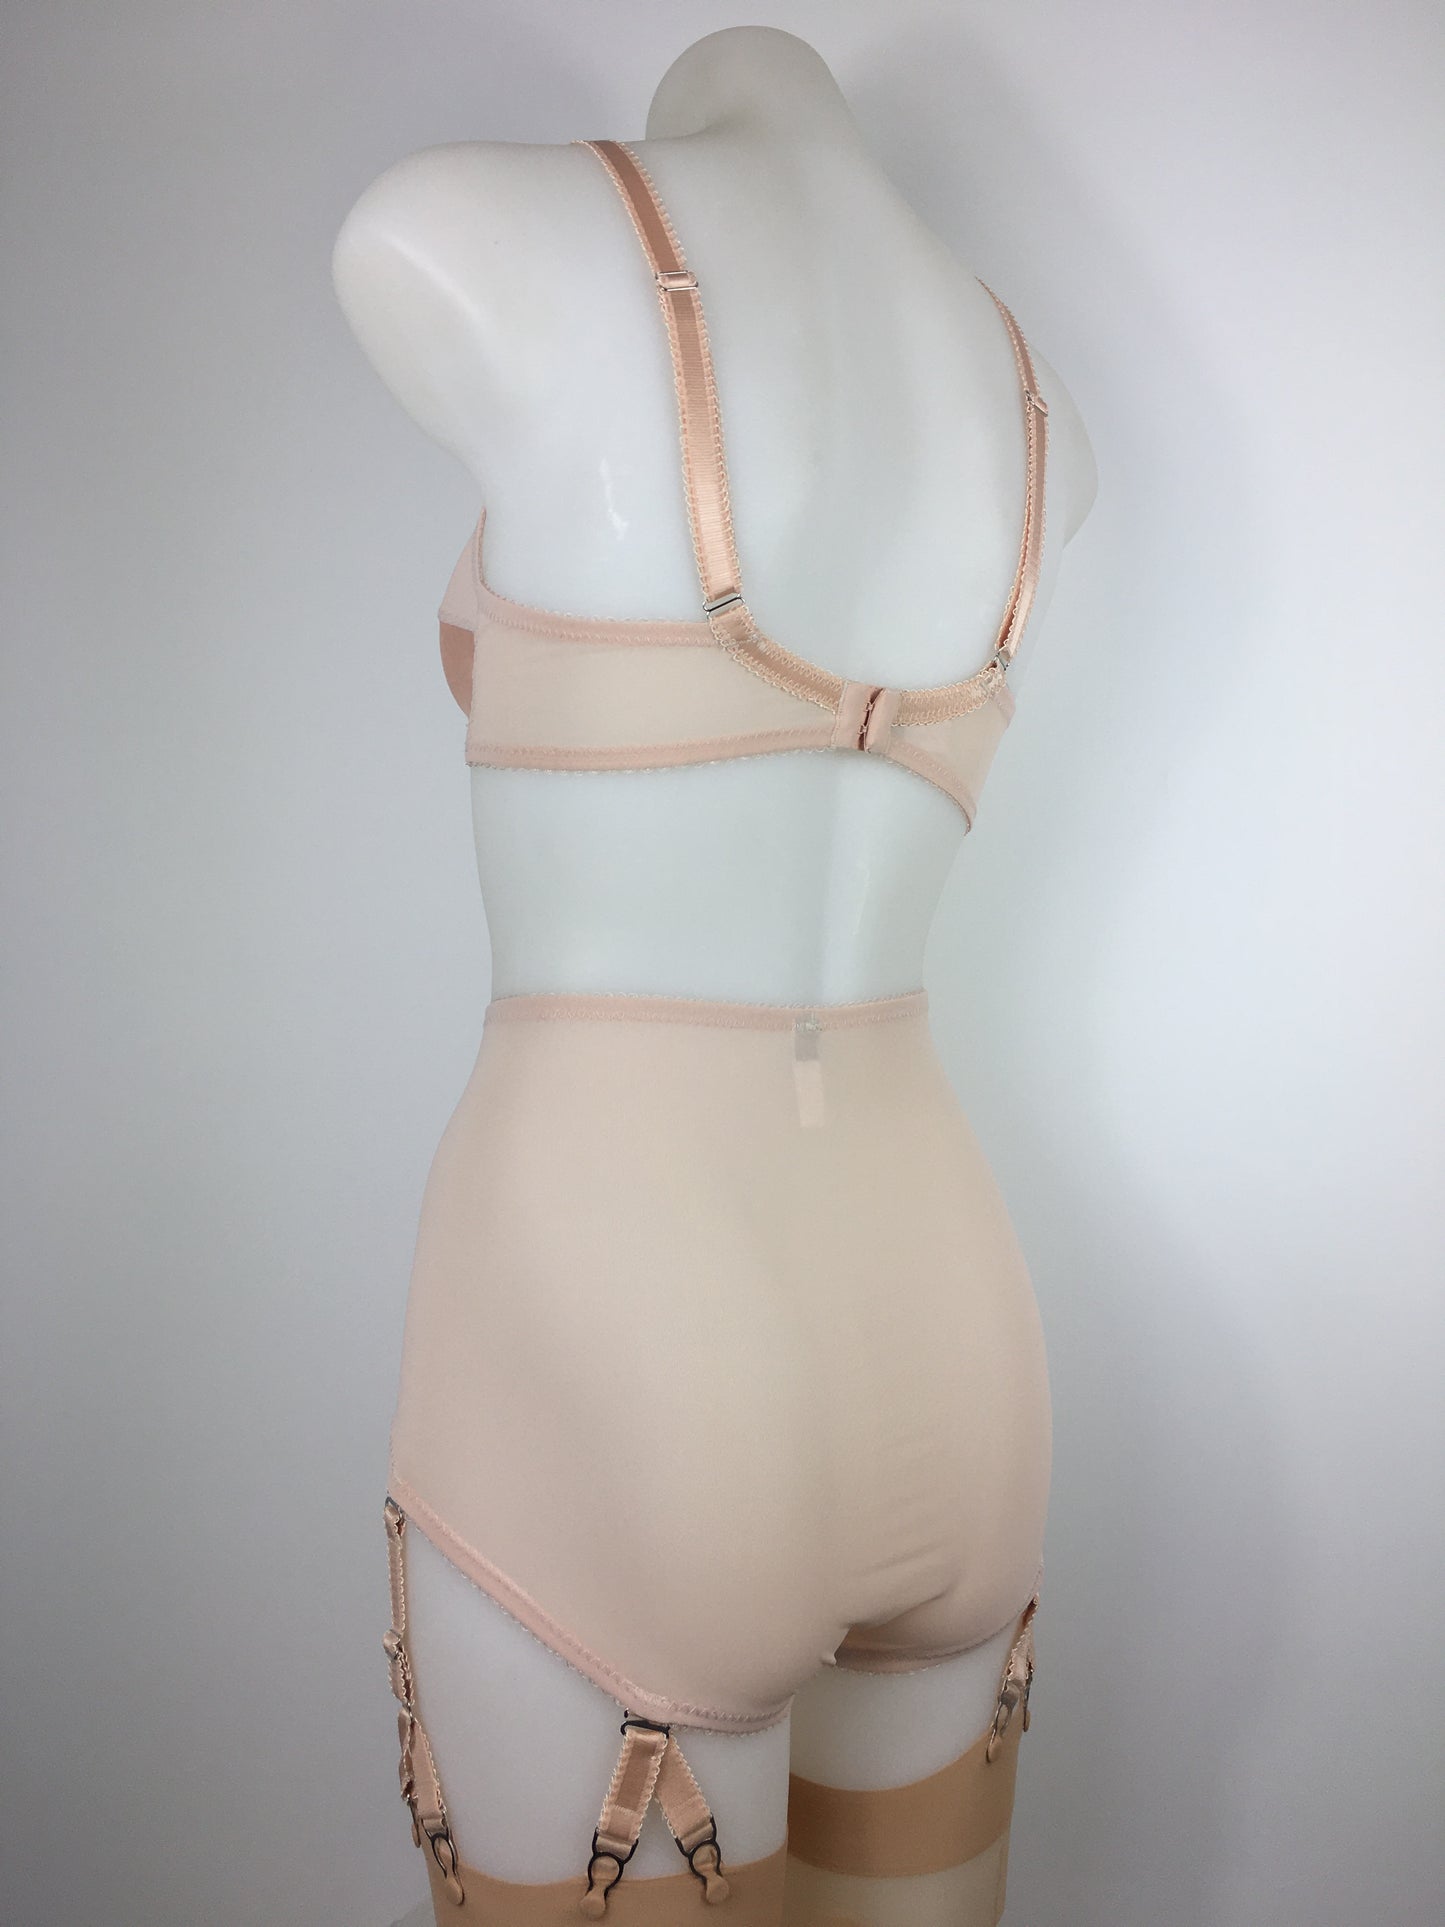 Our most authentic looking vintage inspired lingerie yet. Perfect peachy satin pantie girdle or high waisted knicker with 6 detachable Y straps, characteristic of pip and pantalaimon. Nude big shapewear knickers with garter straps to keep your seamed stockings in place all day. Fabulous faux and reproduction lingerie made in the uk